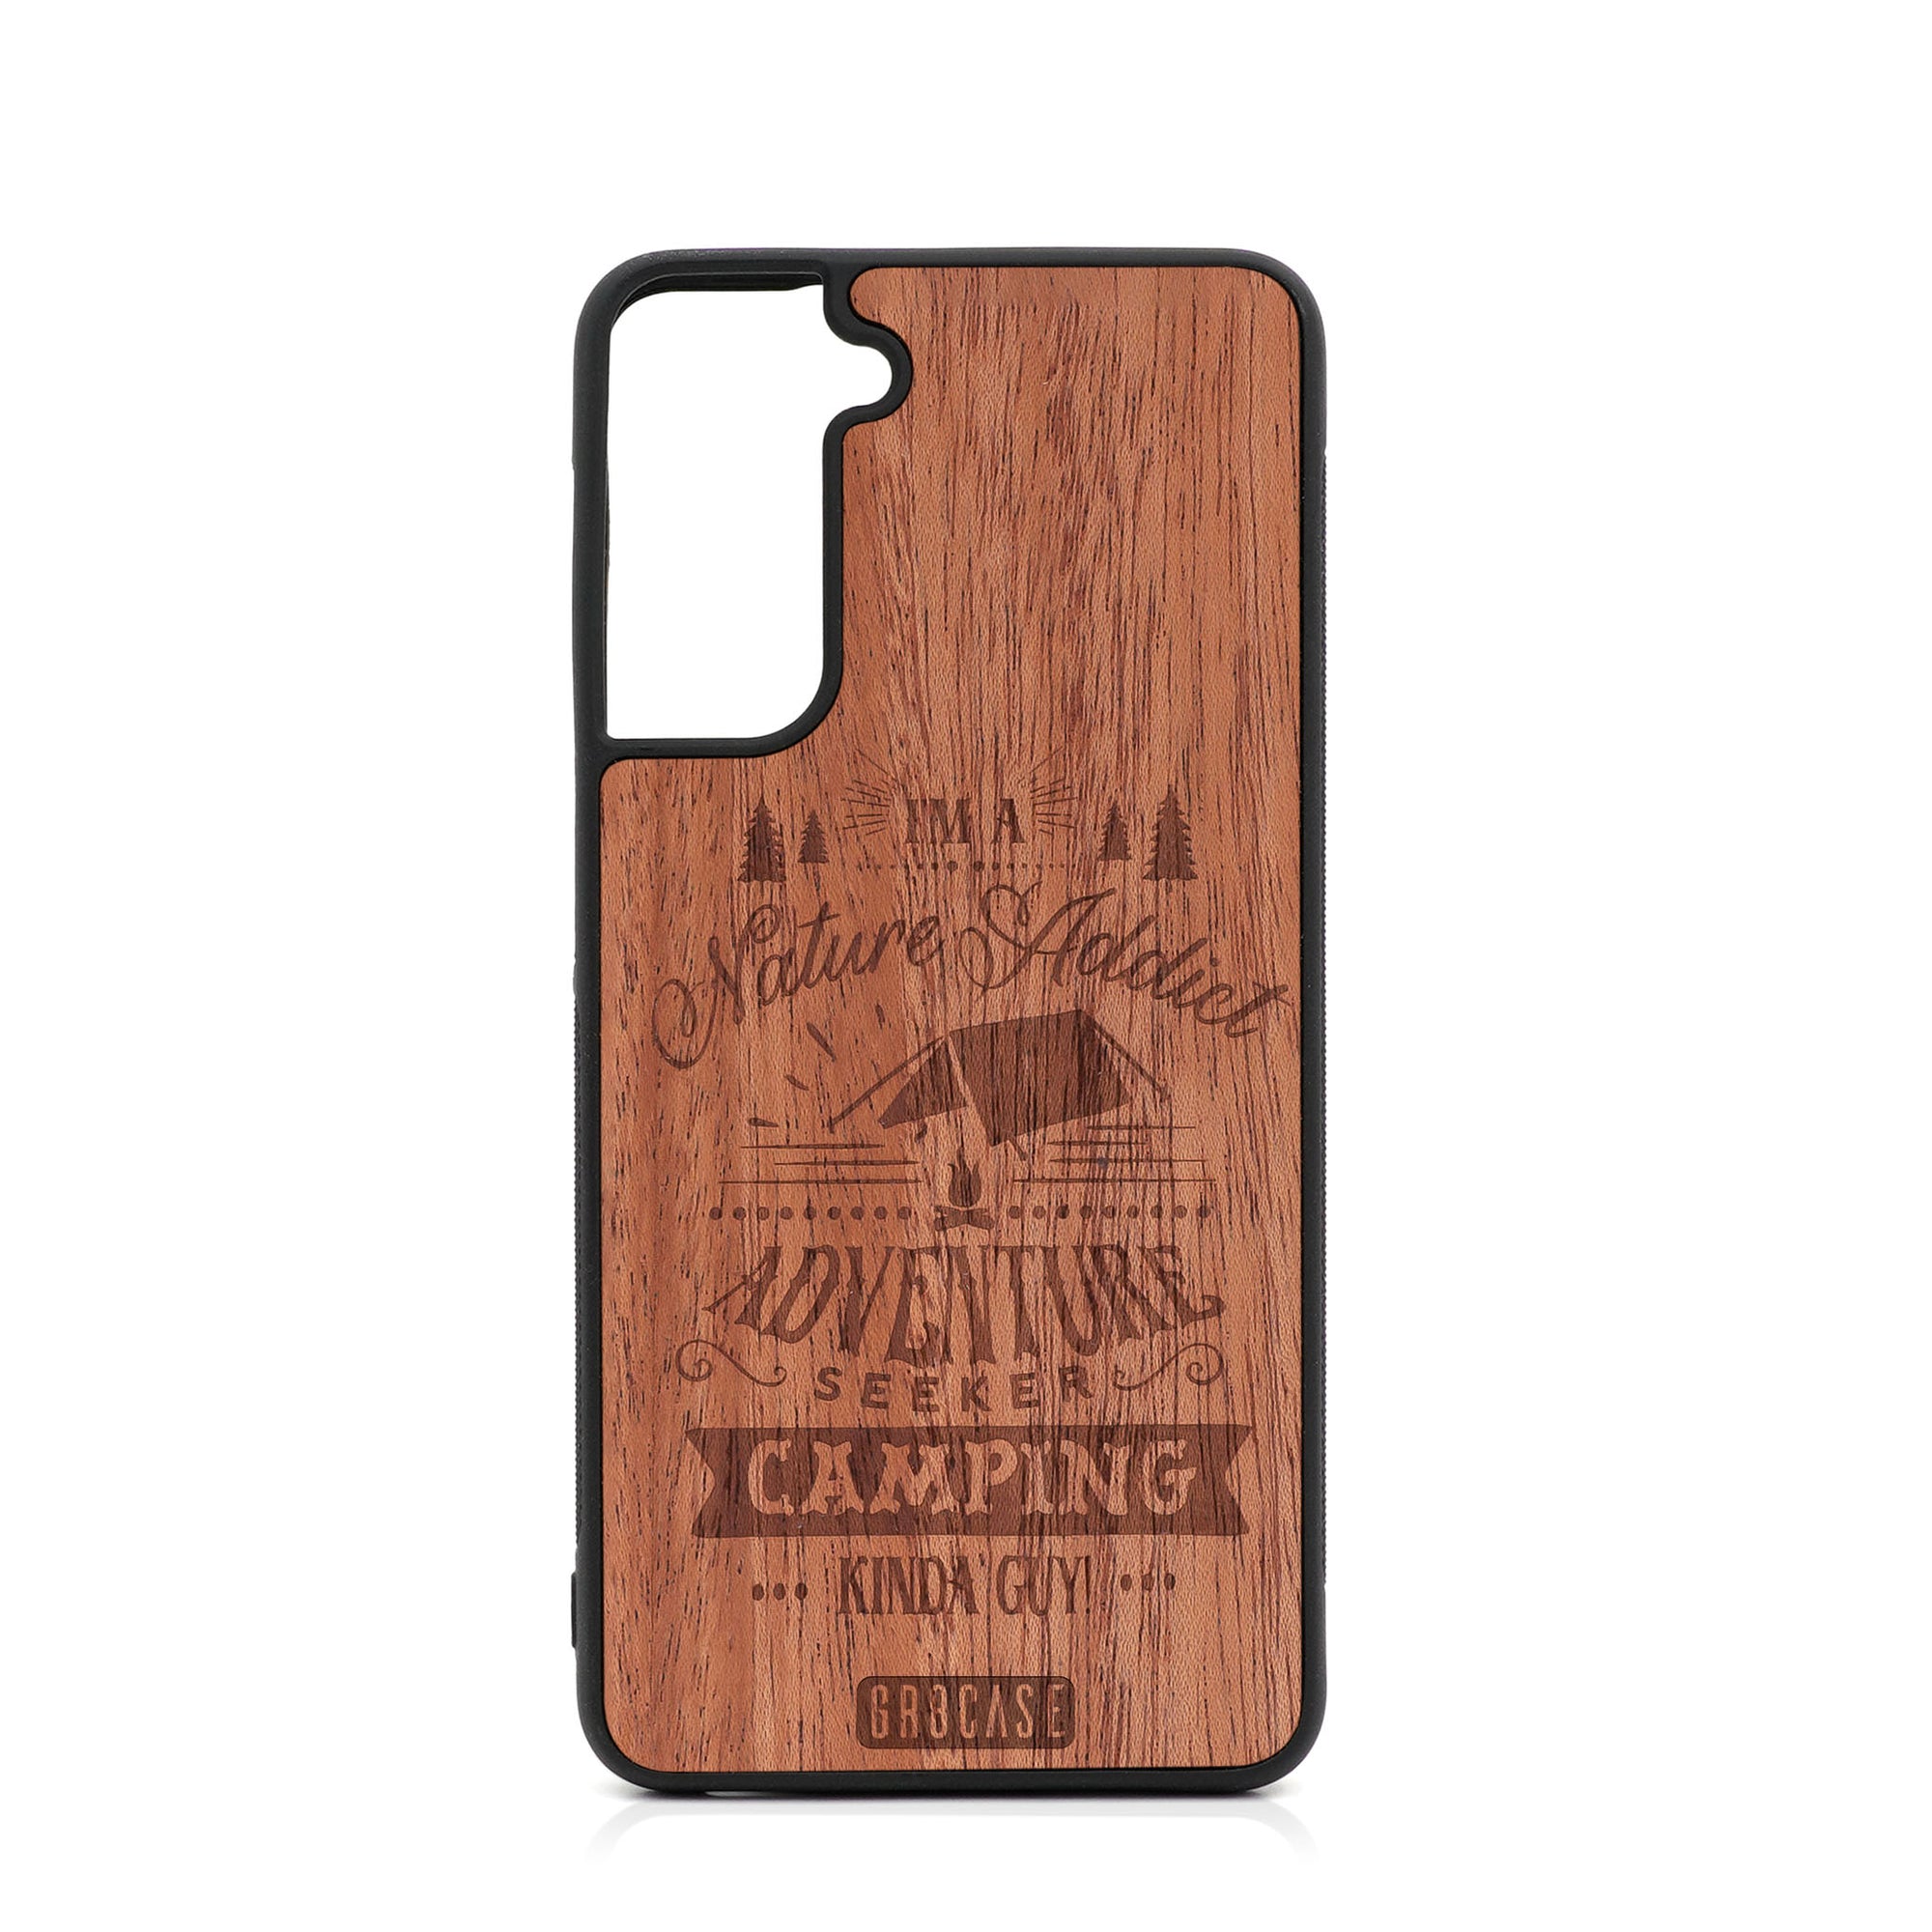 I'm A Nature Addict Adventure Seeker Camping Kinda Guy Design Wood Case For Samsung Galaxy S21 5G